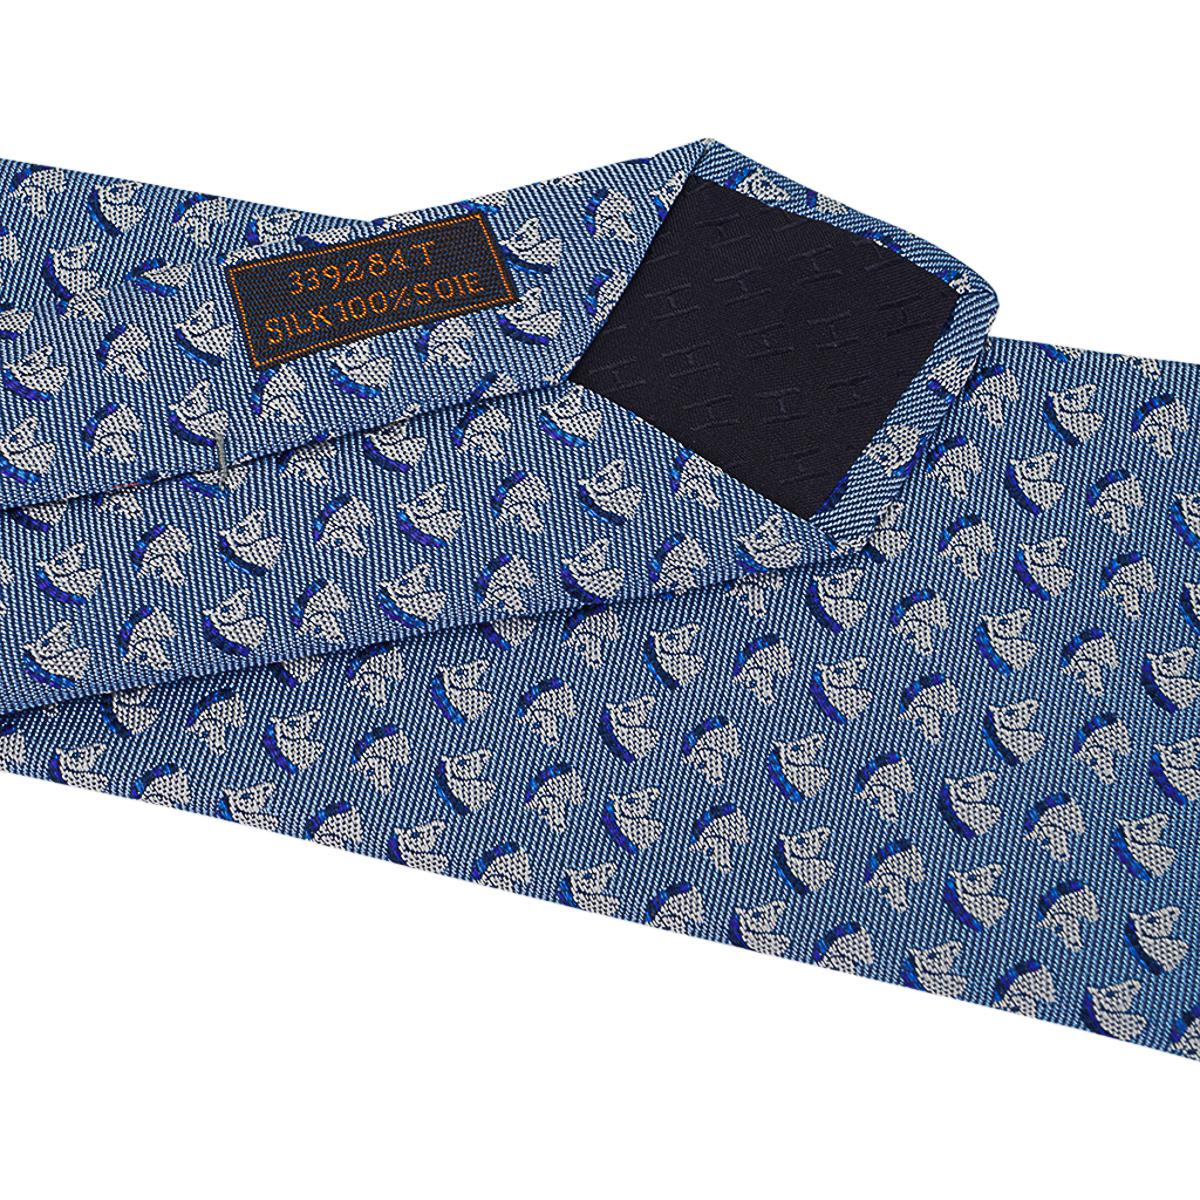 Hermes Cheval Rebelle Tie 7 Ciel Blanc and Marine Heavy Silk Twill For Sale 7